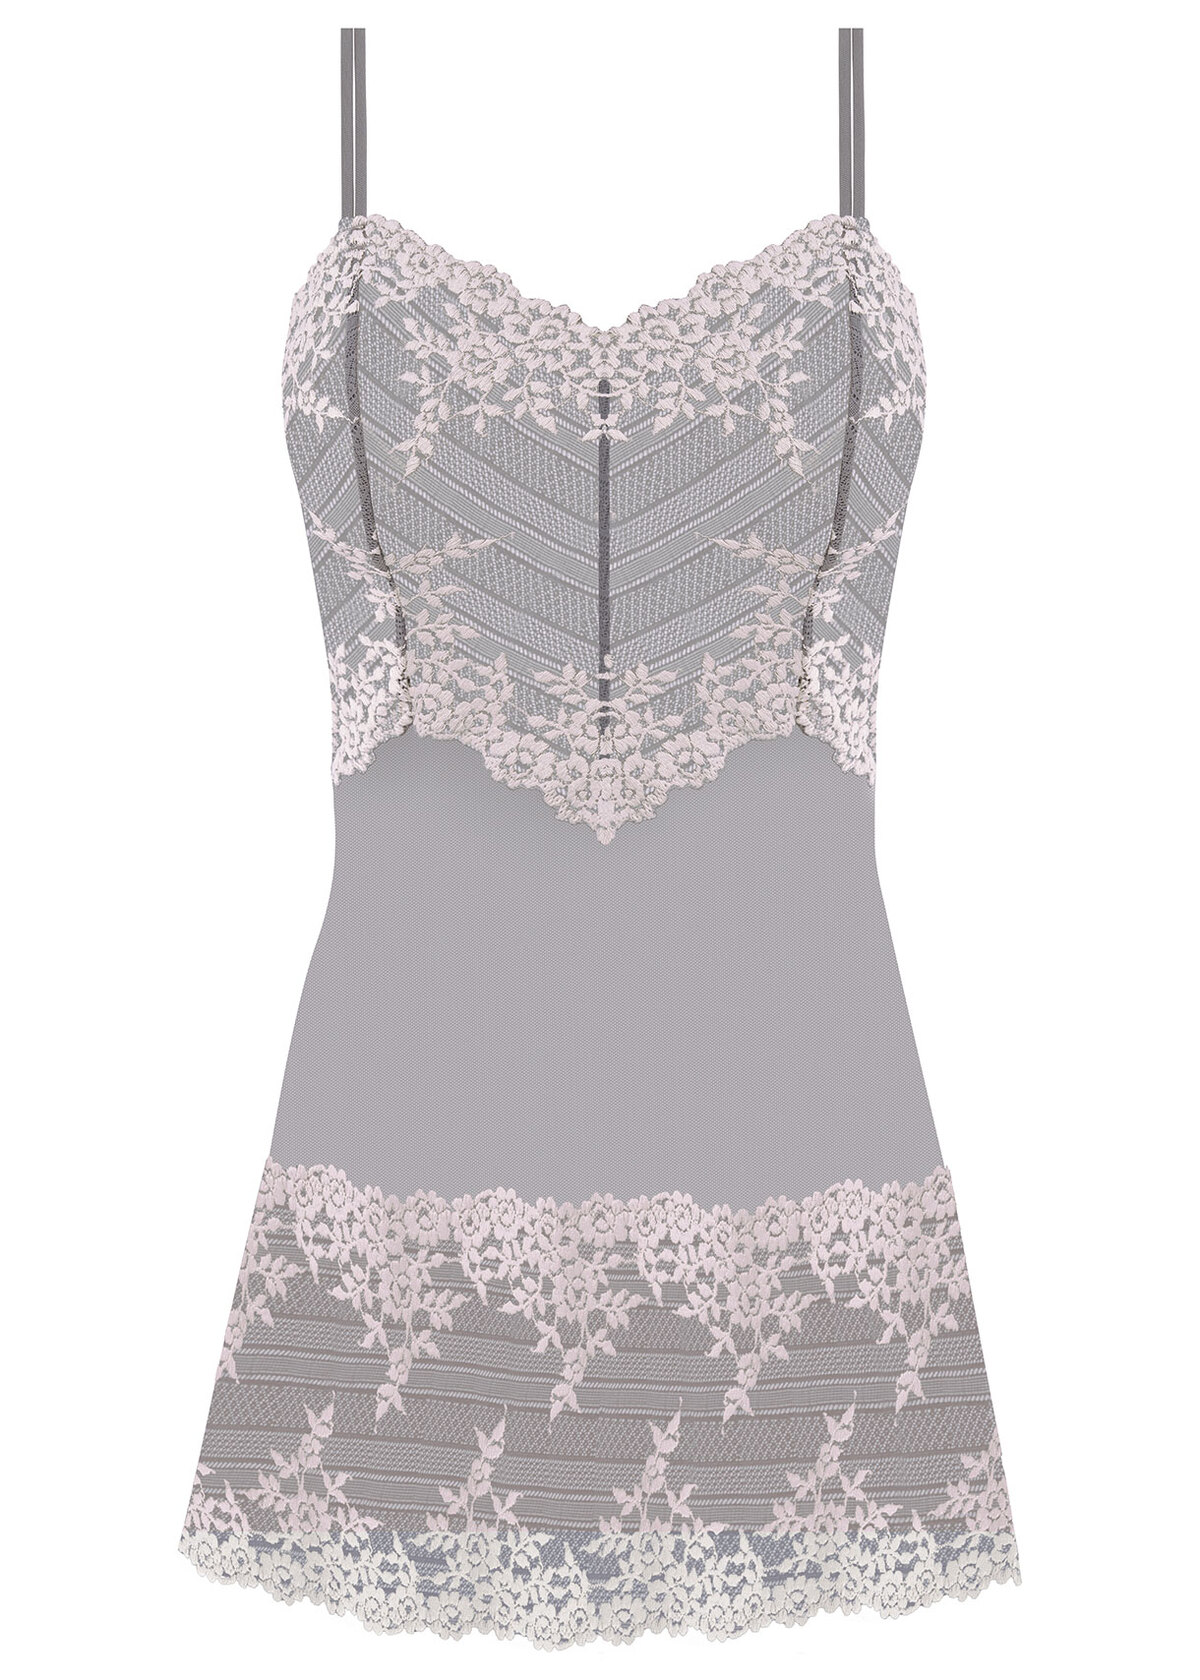 Embrace Lace Smoke/crystal Pink Chemise from Wacoal